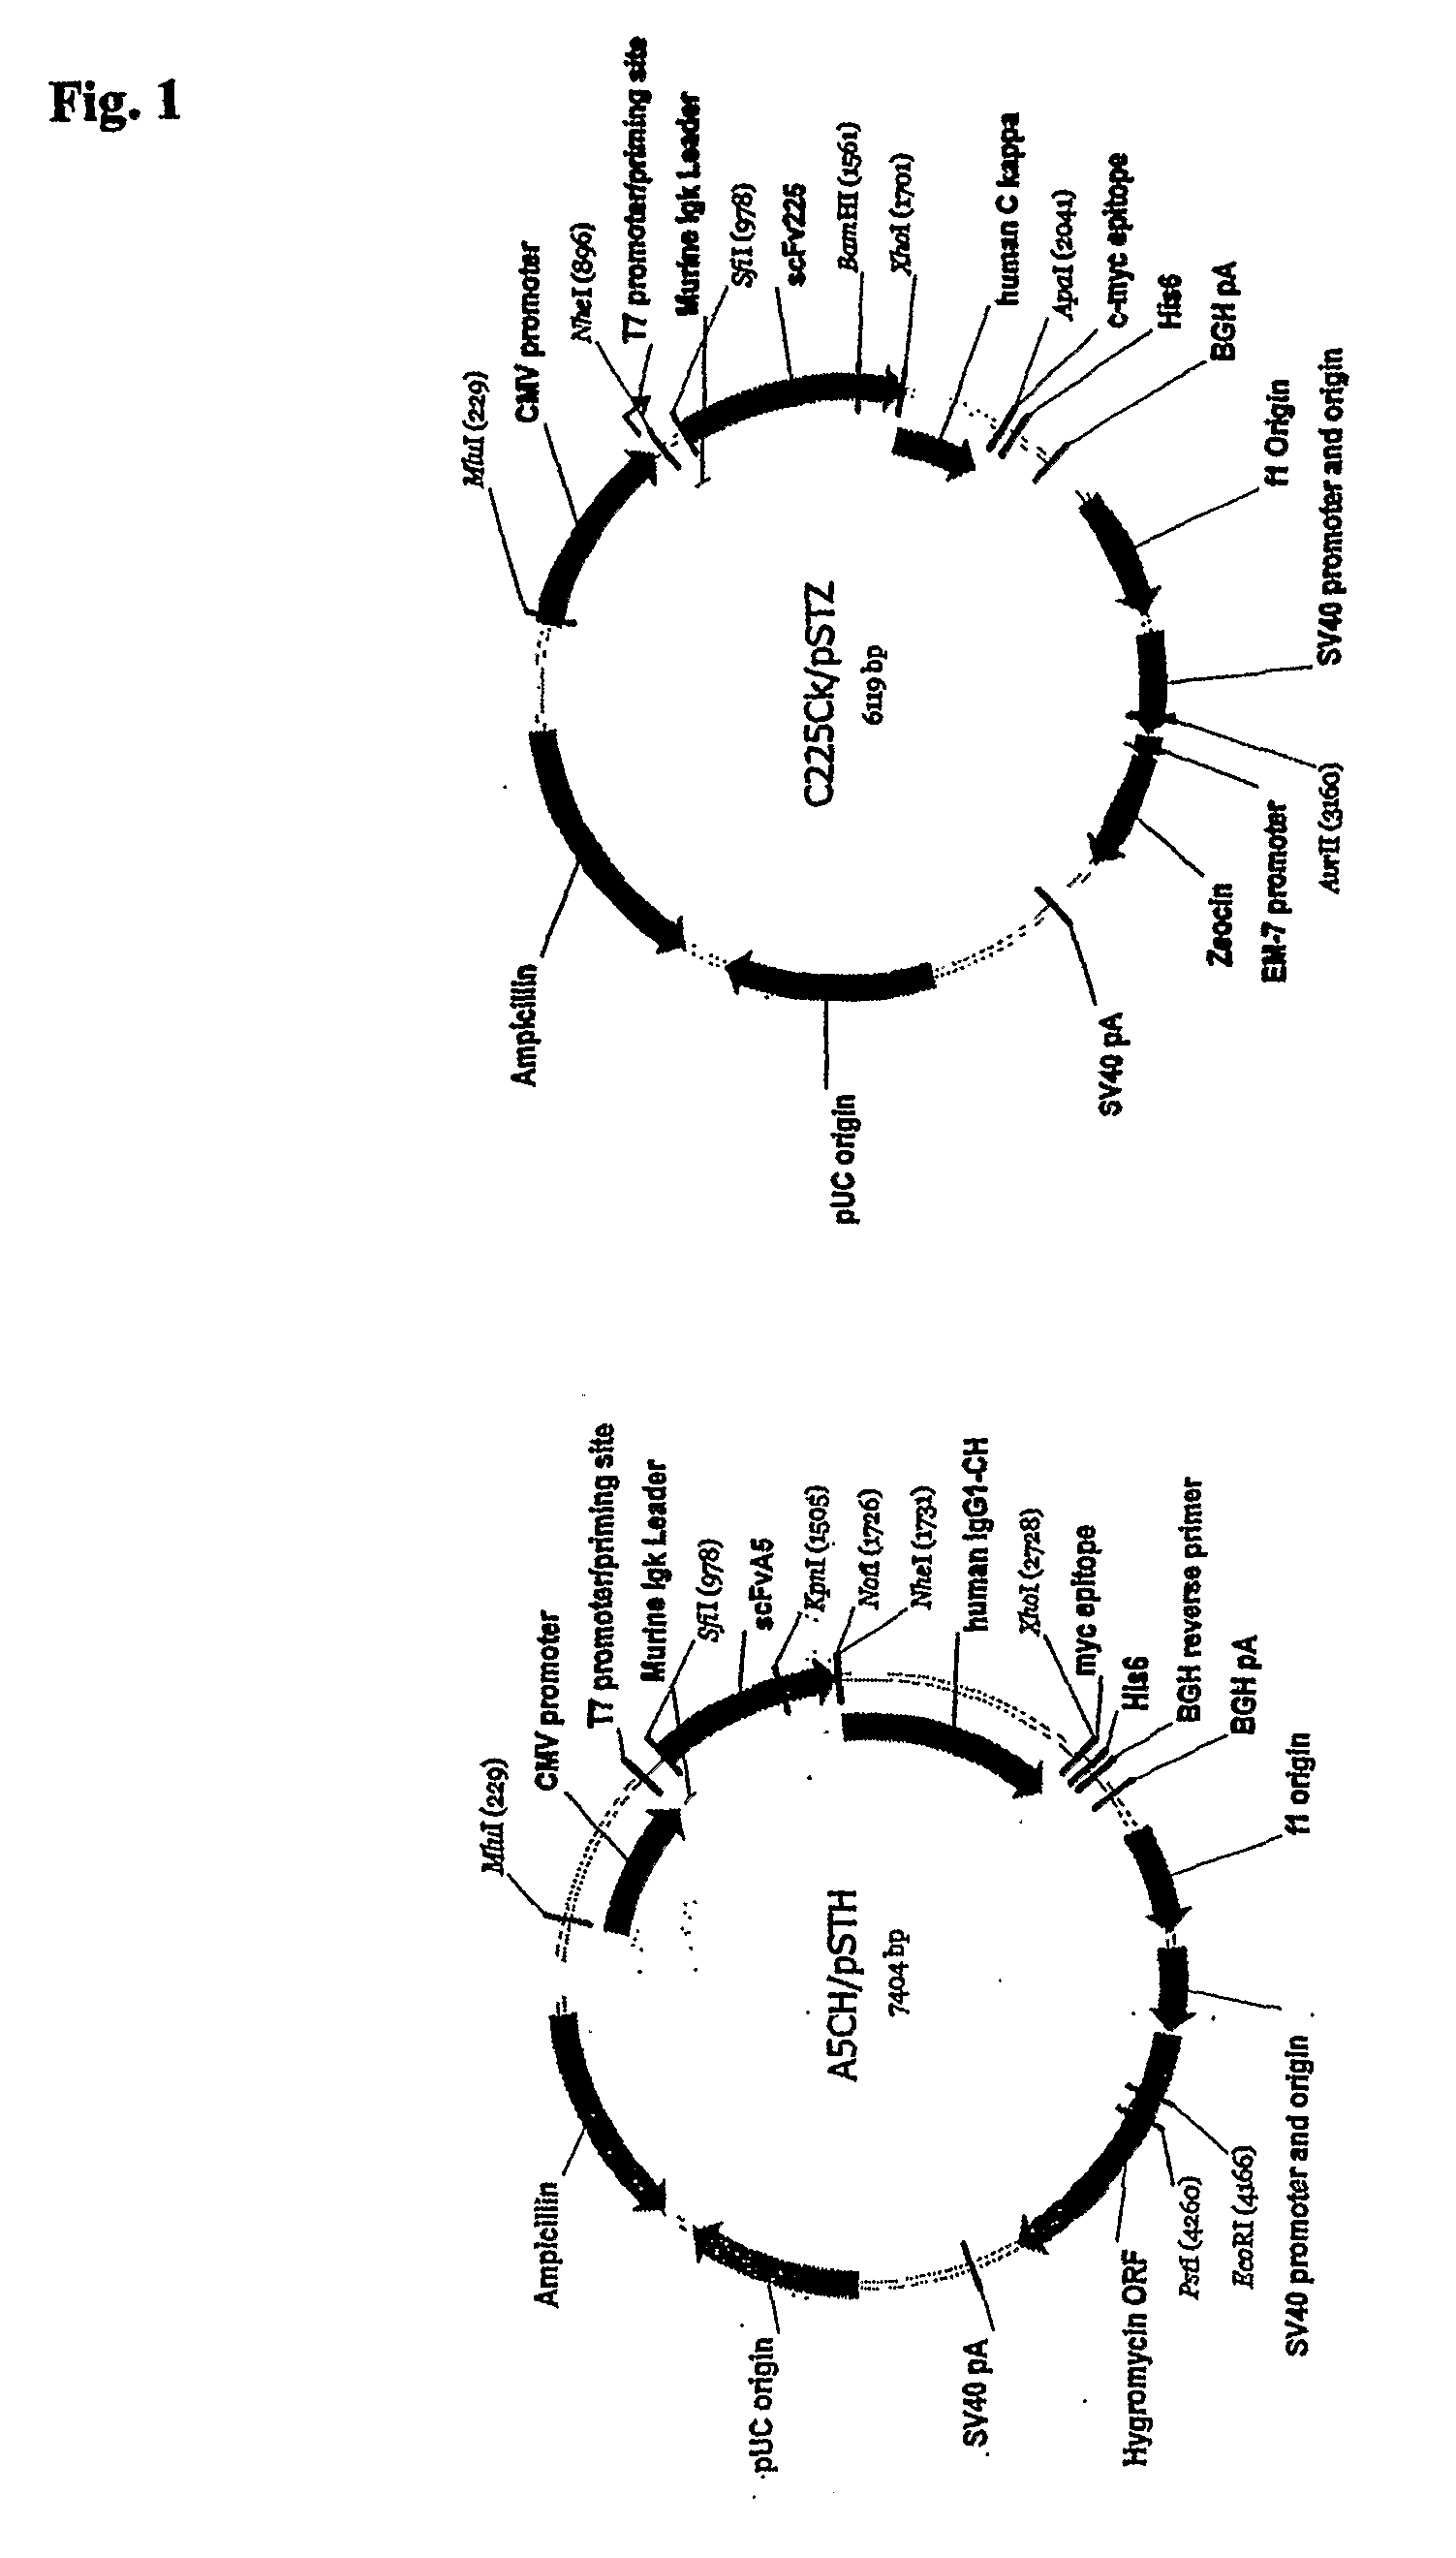 Bispecific binding agents for modulating biological activity